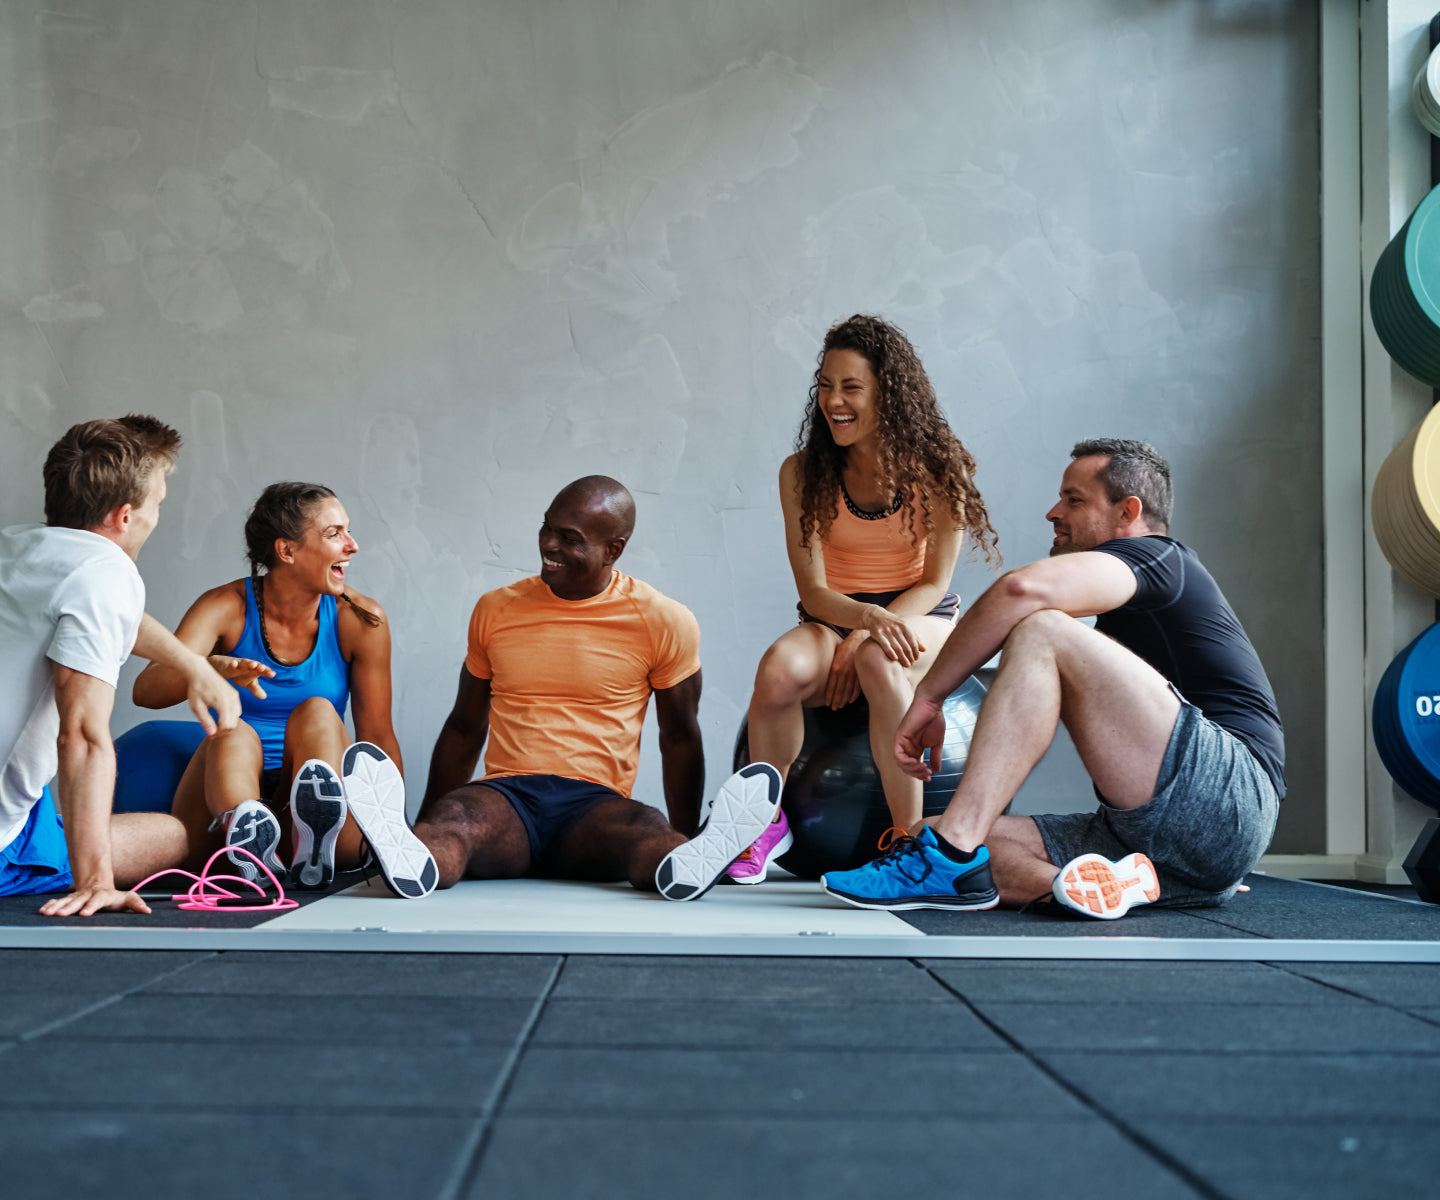 Fitness group sitting down and happily talking after a workout in a fitness studio